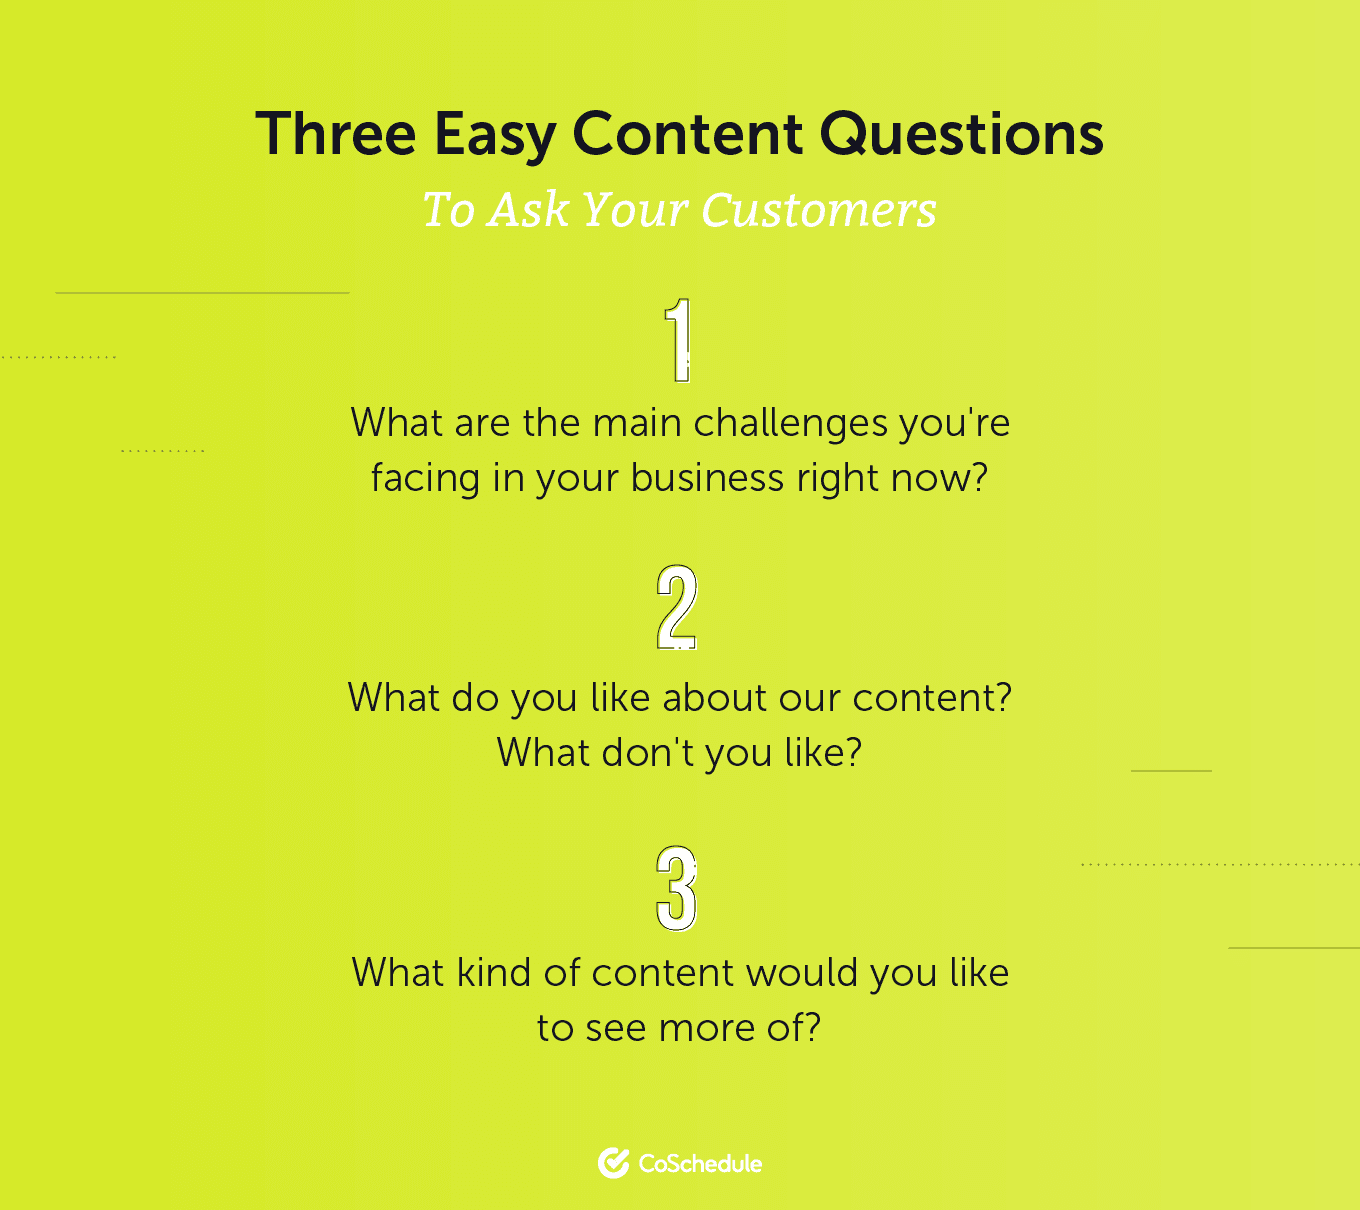 Three Easy Content Questions to Ask Your Customers